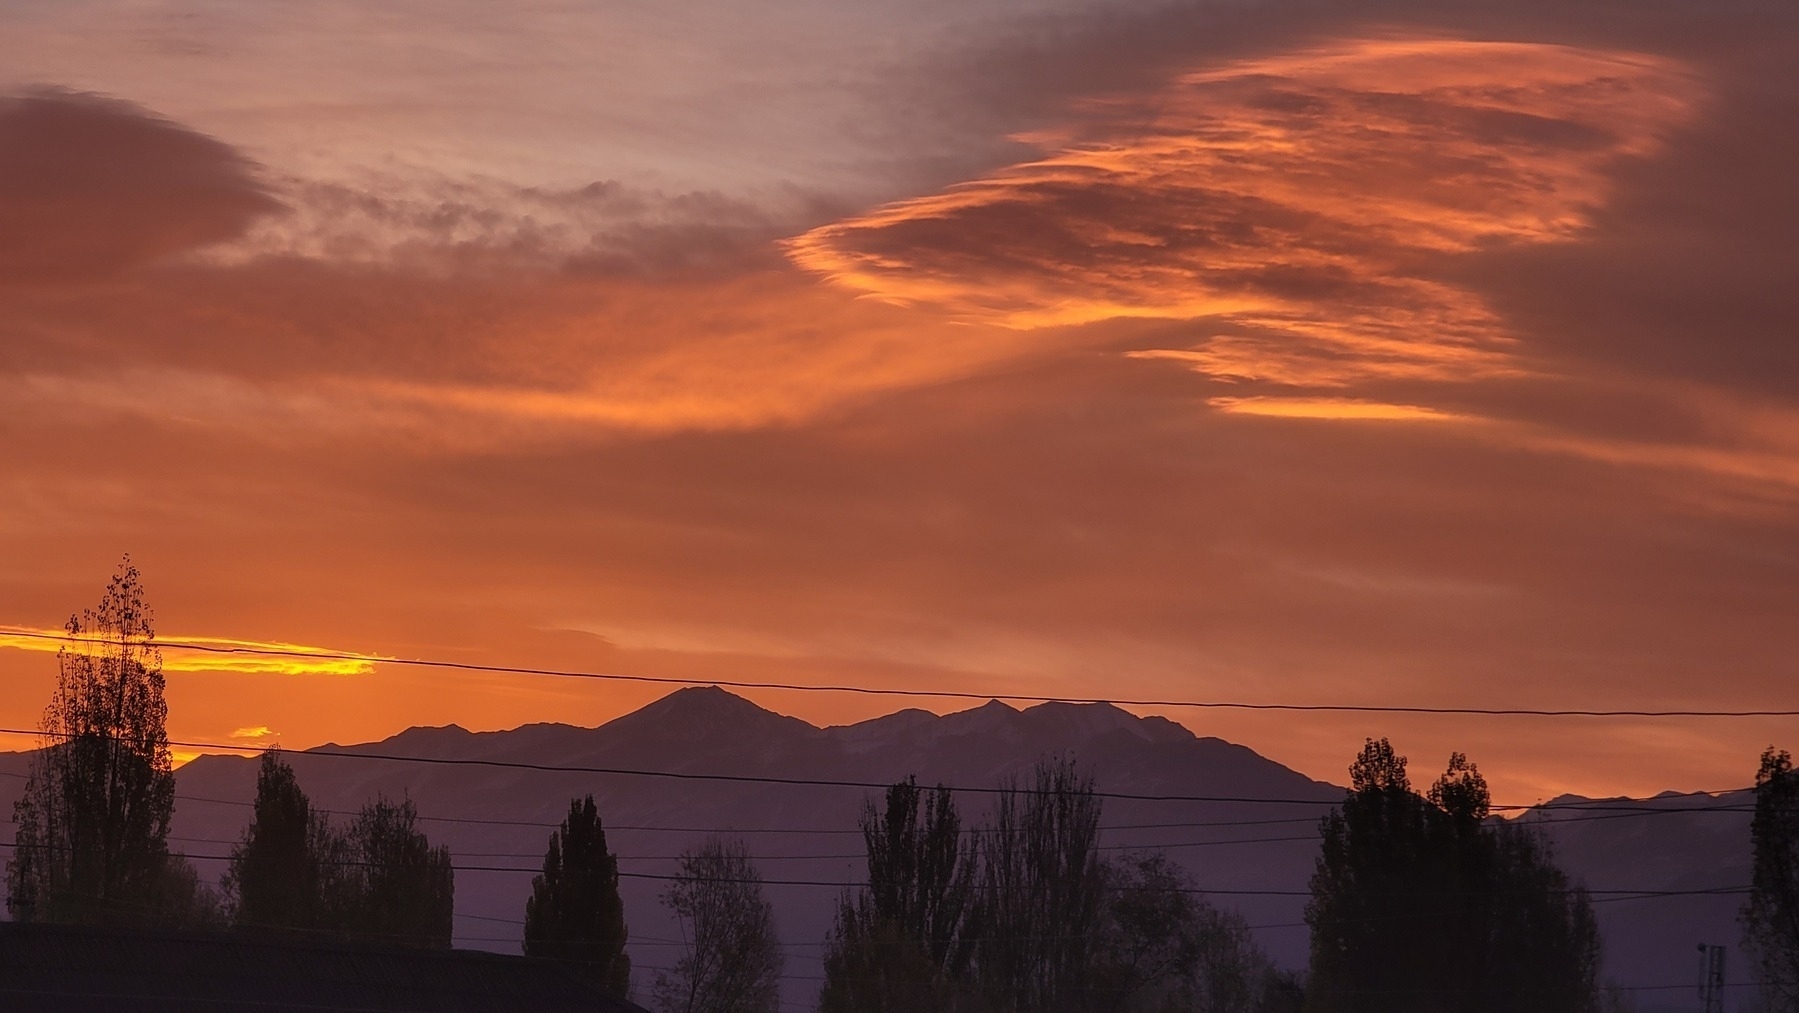 orange/purple sky/clouds and mountains in the background; trees and powerlines in the foreground 